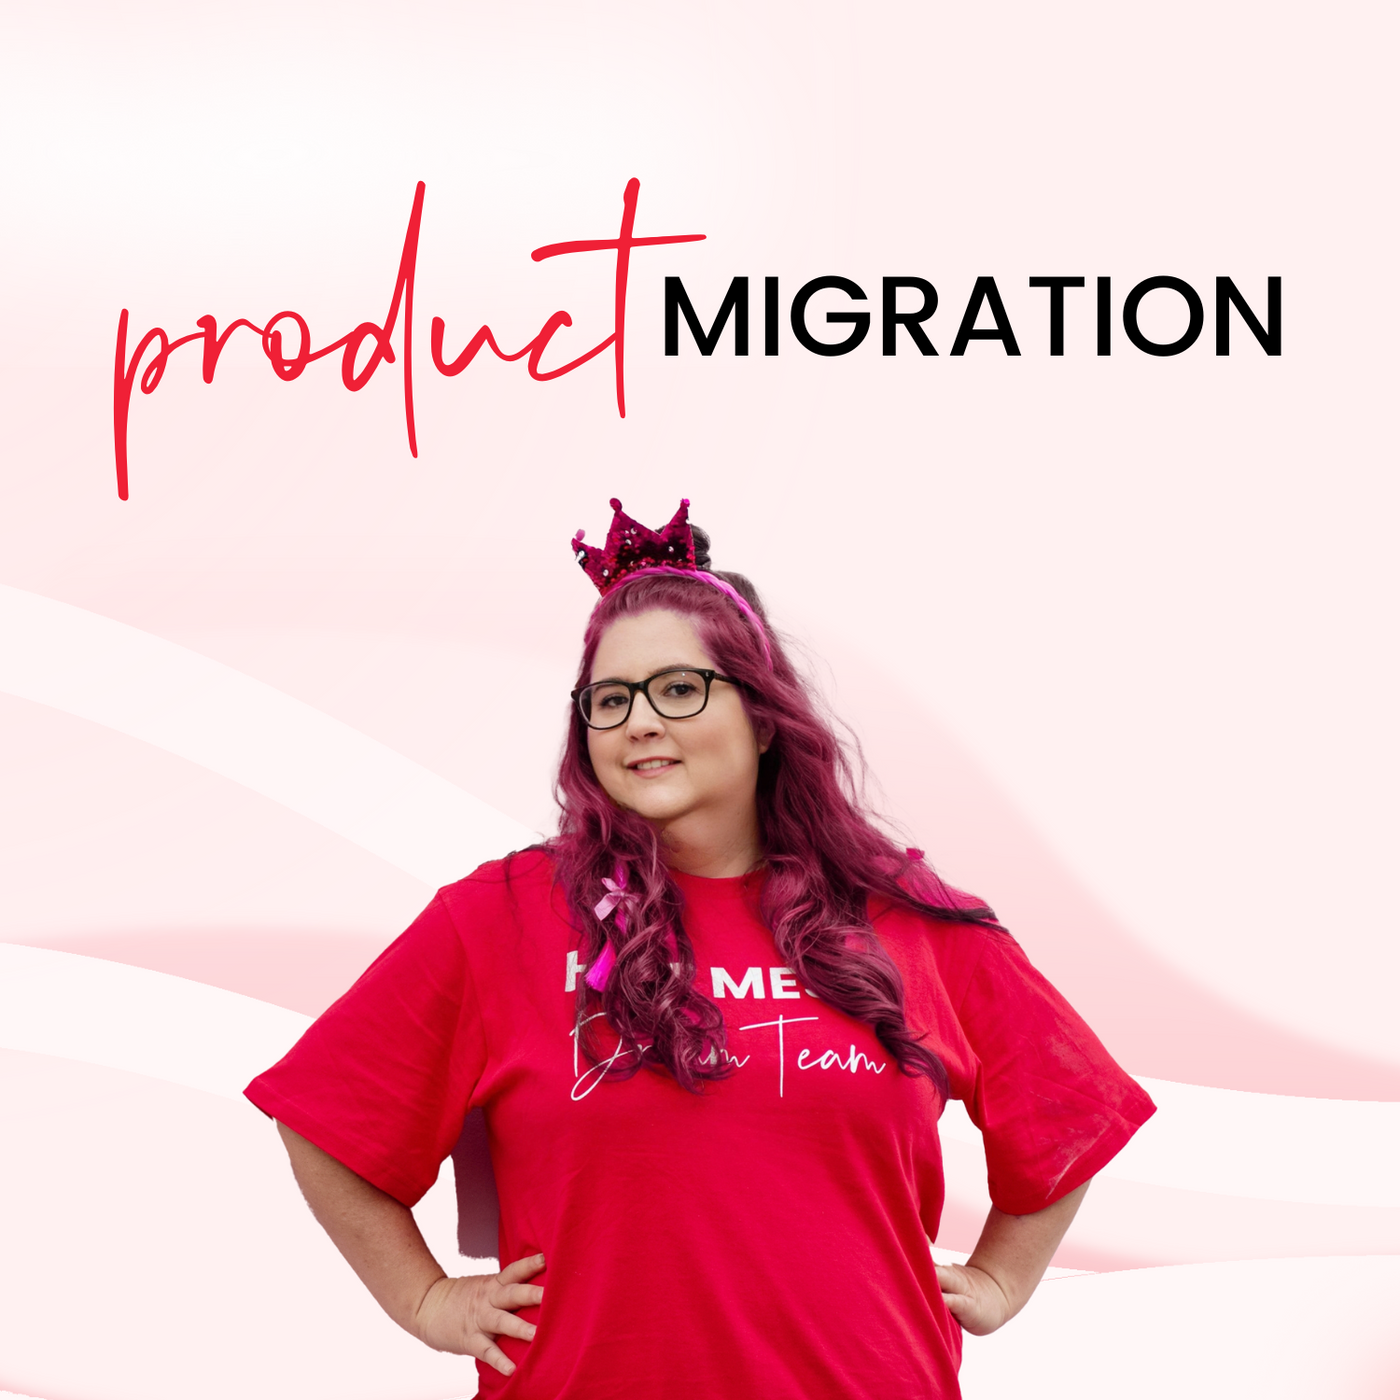 Product Migration & Support